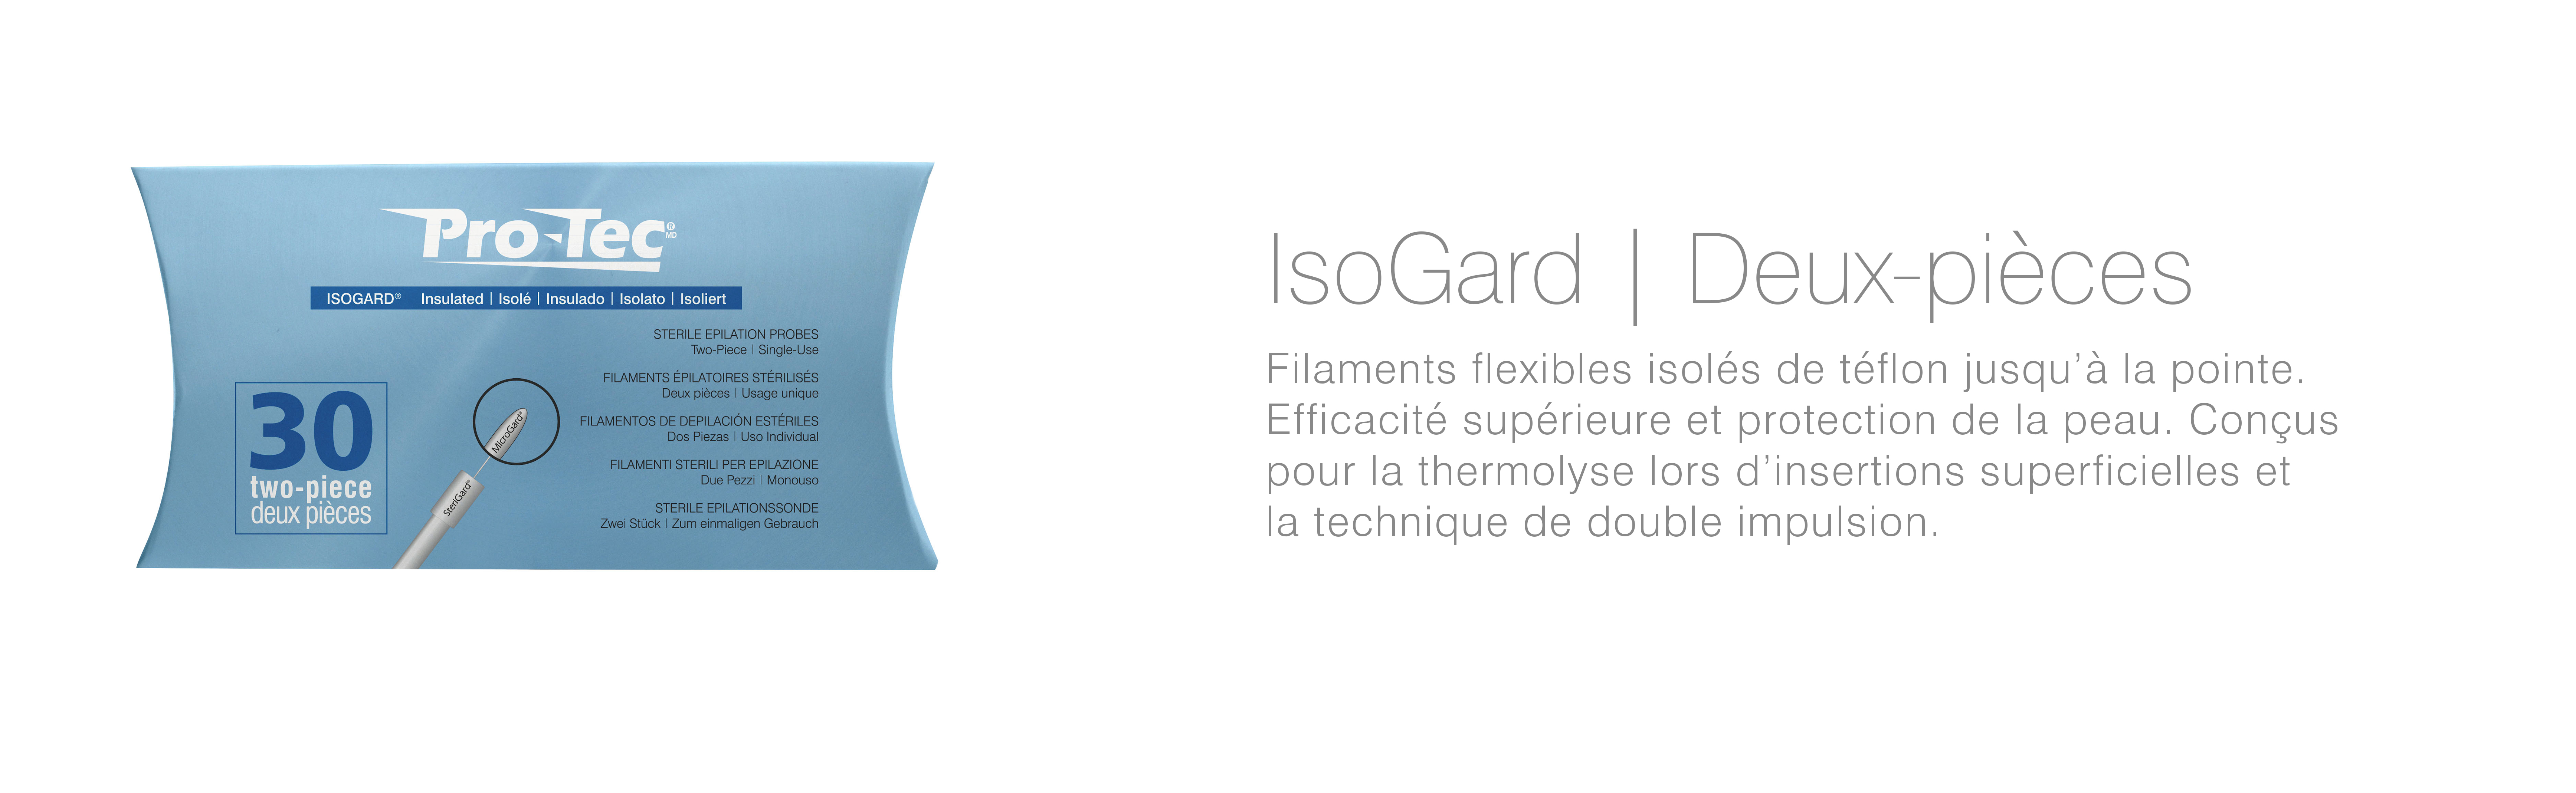 page-filament-protec_isogard-two-pieces_fr